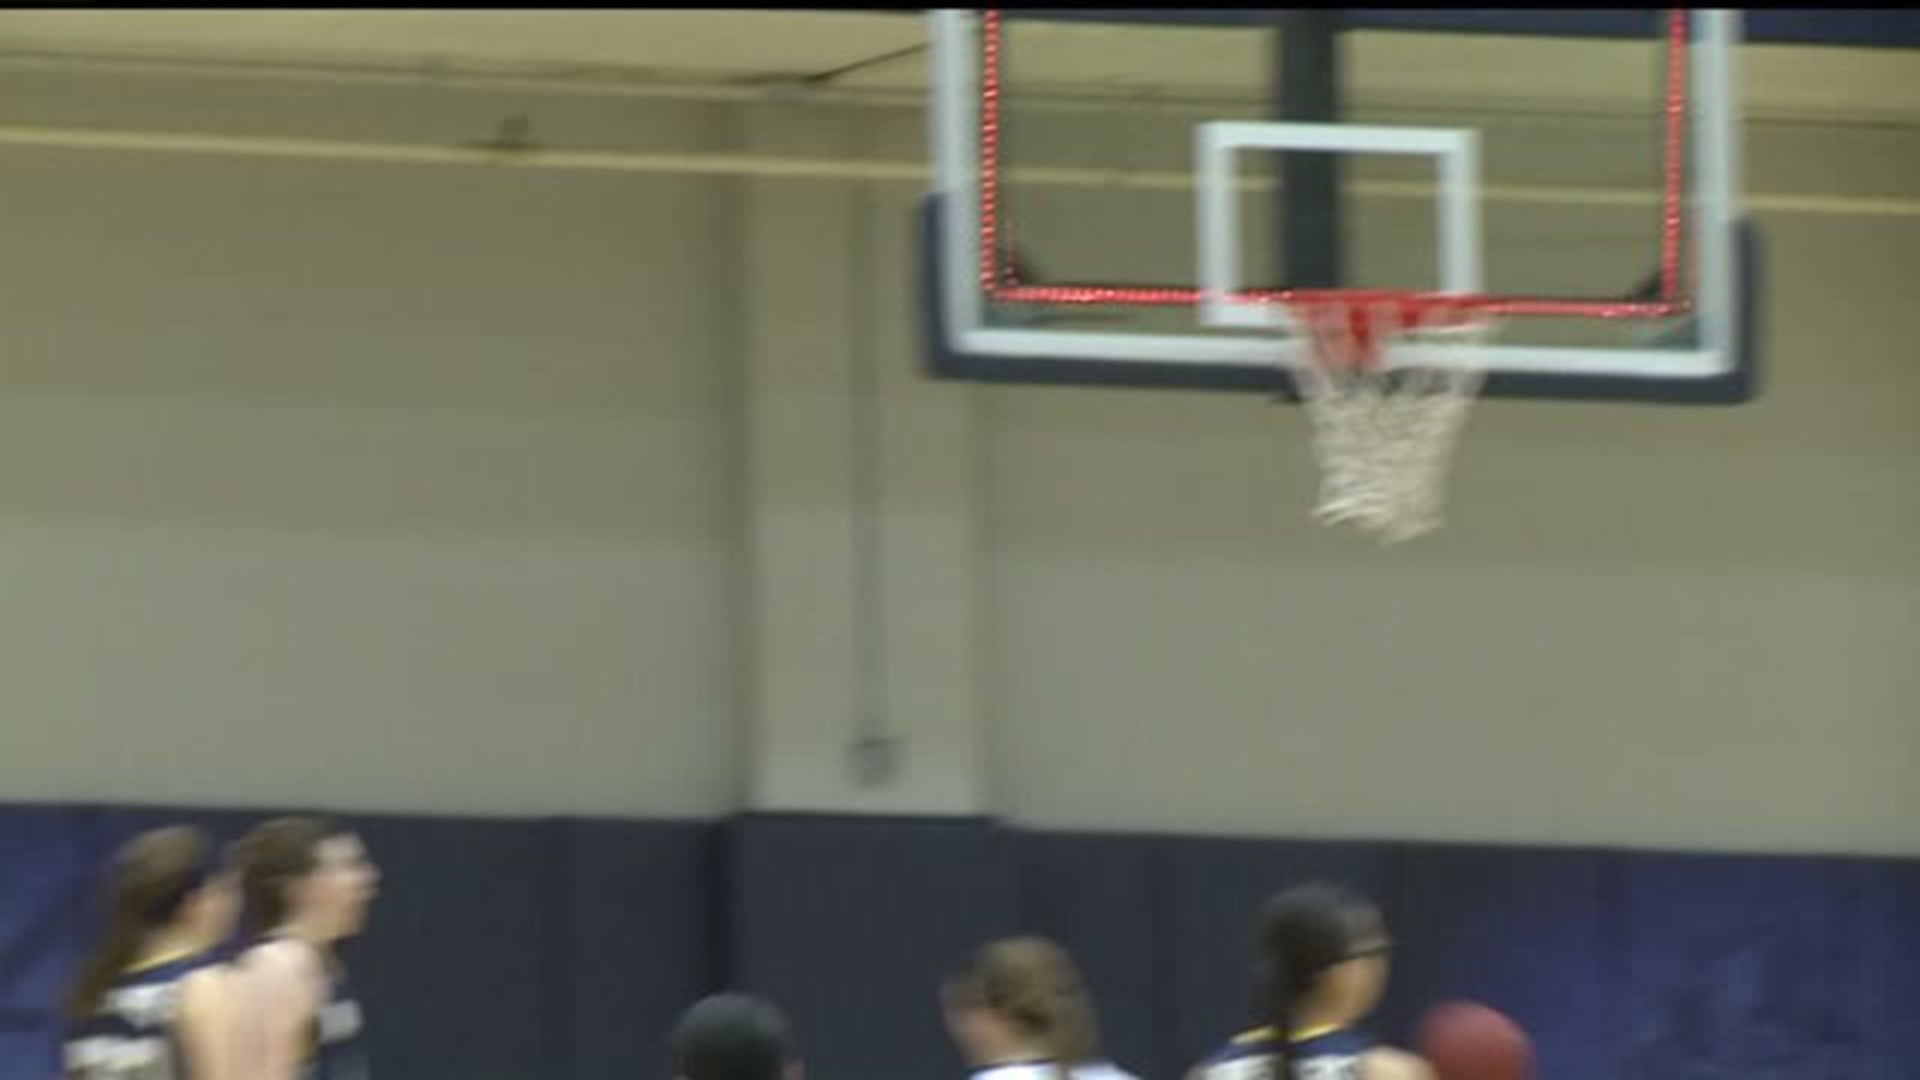 St. Ambrose Queen Bees win on Buzzer Beater